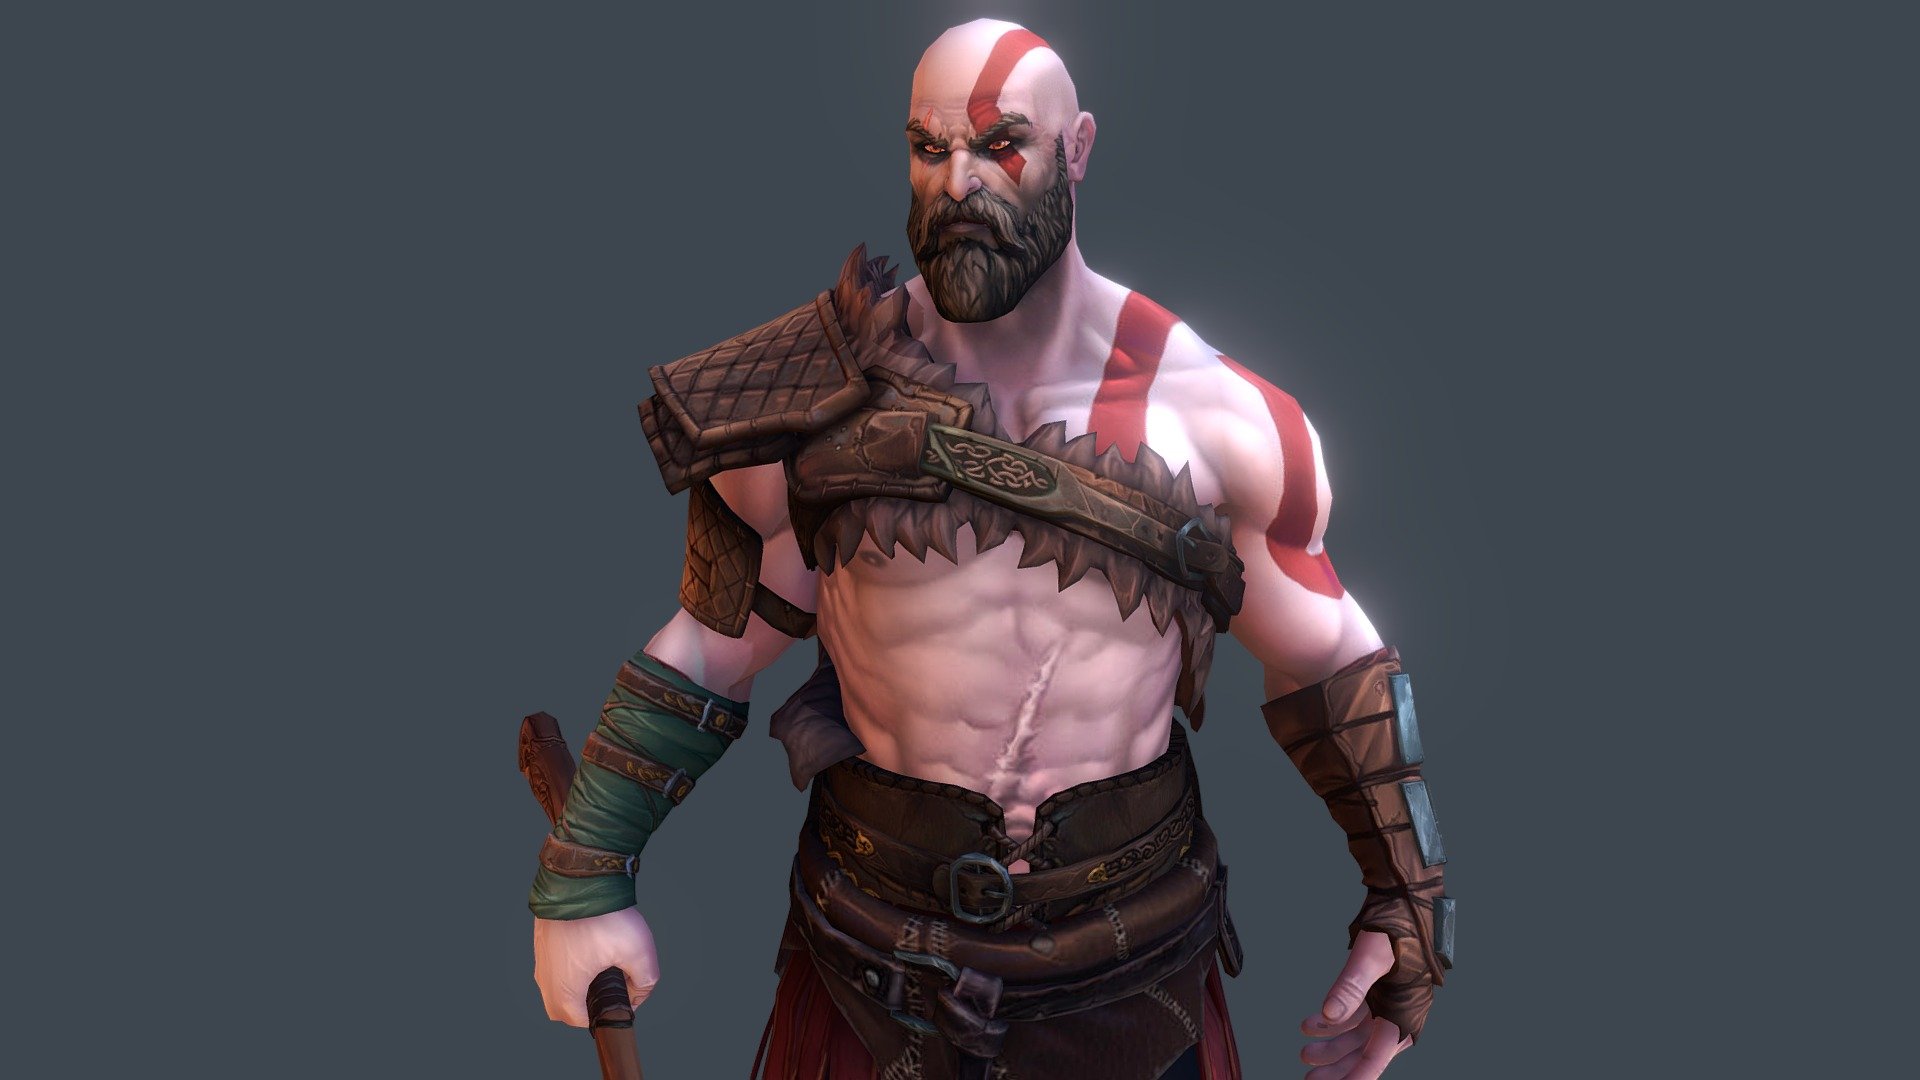 I wanted to make a lowpoly version of Kratos, as if it were for a game like League of Legends.

Softwar used: Zbrush, Maya, Photoshop, 3dCoat 3d model